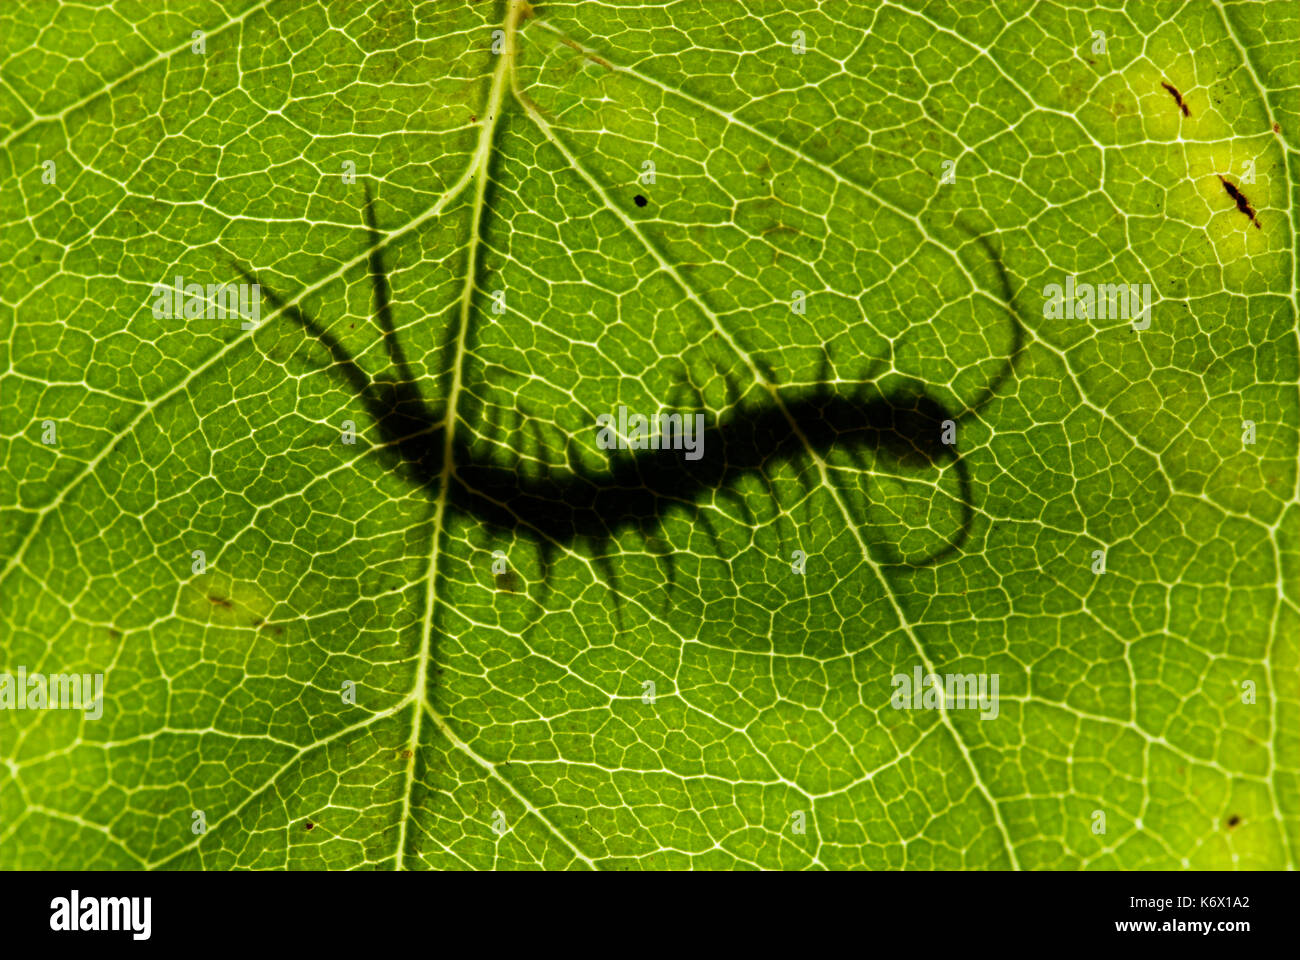 Common Centipede, Lithobius species, backlight, silhouette, on leaf in garden, showing head, segmented body, antennae and legs Stock Photo